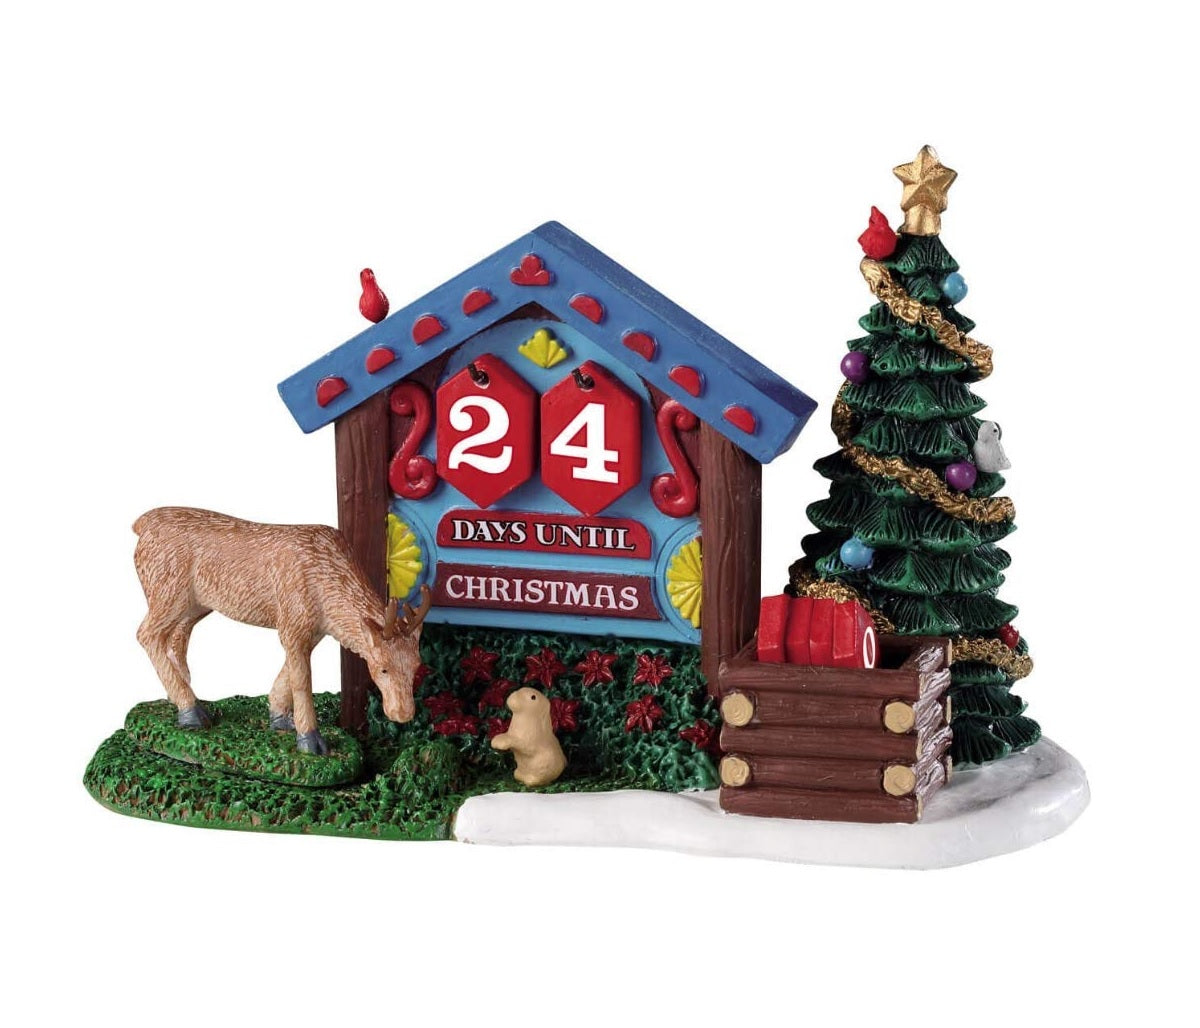 Lemax 93436 Woodland Countdown Christmas Village Accessory, Multicolored